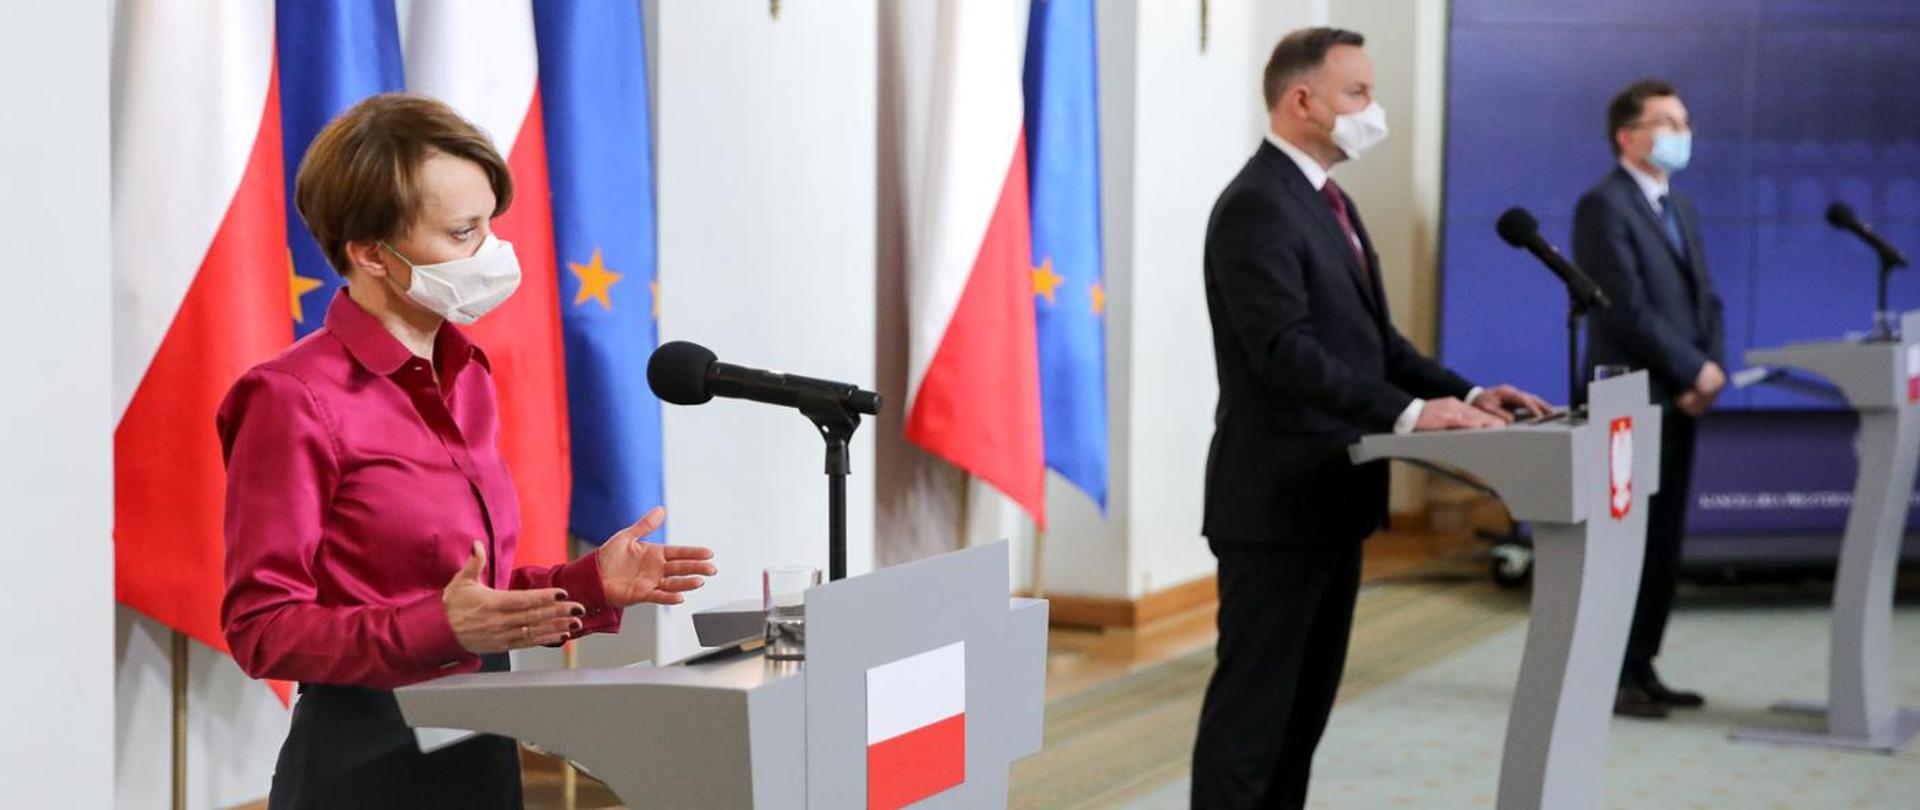 Deputy Prime Minister Jadwiga Emilewicz and President Andrzej Duda during conference